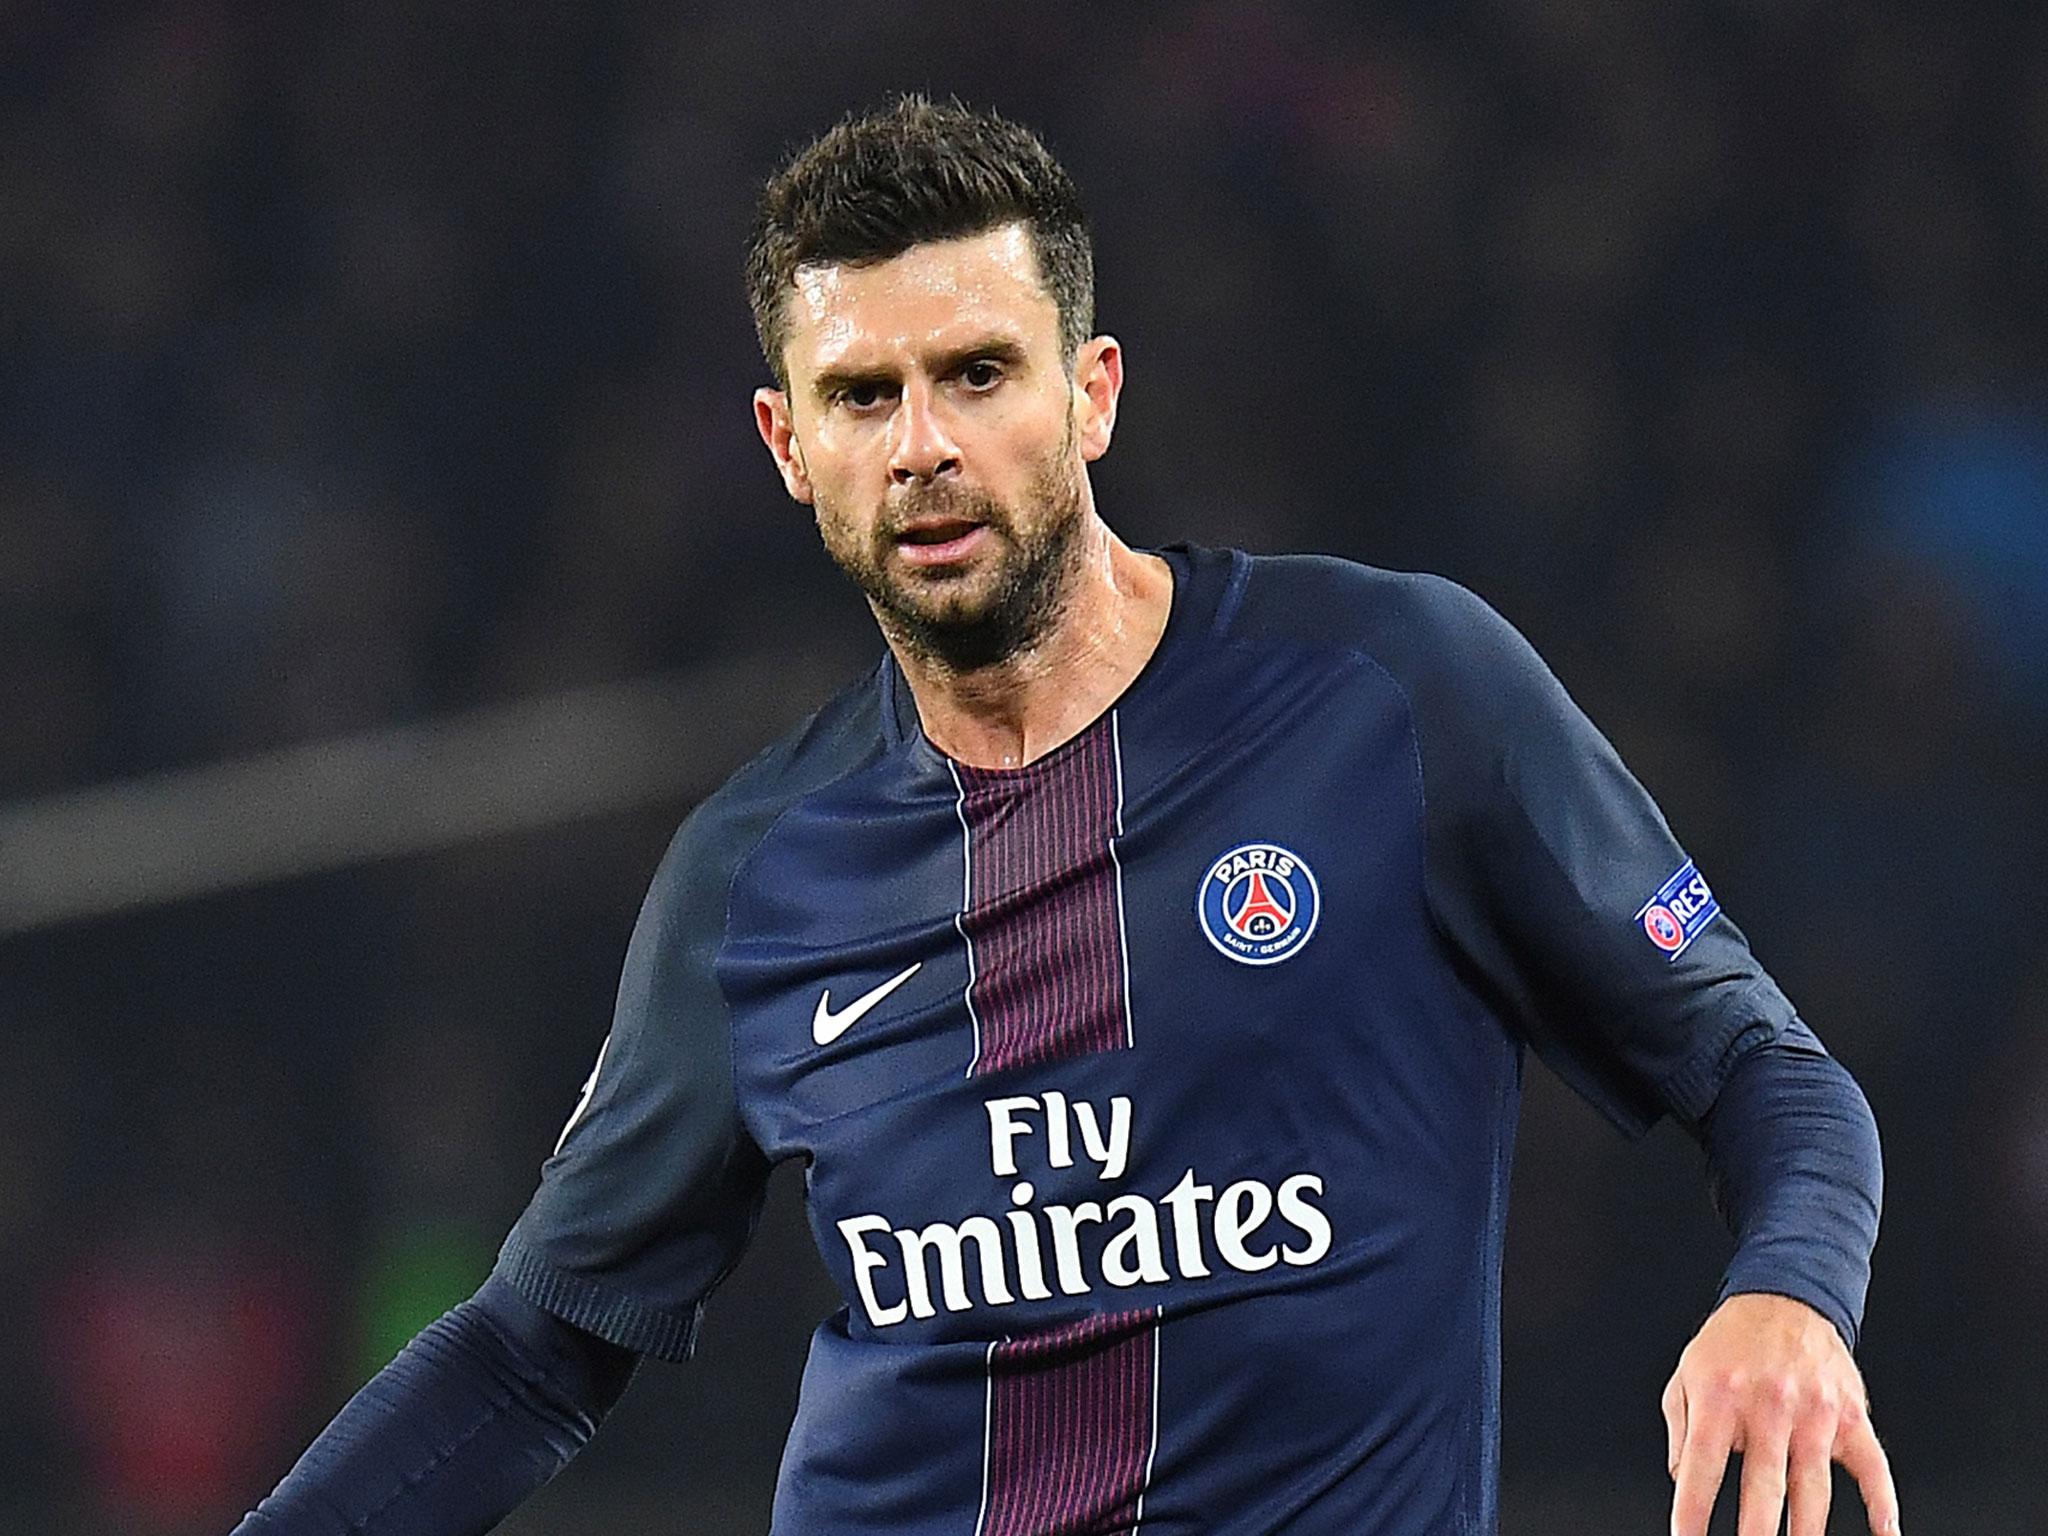 Thiago Motta has been accused of driving into a fan